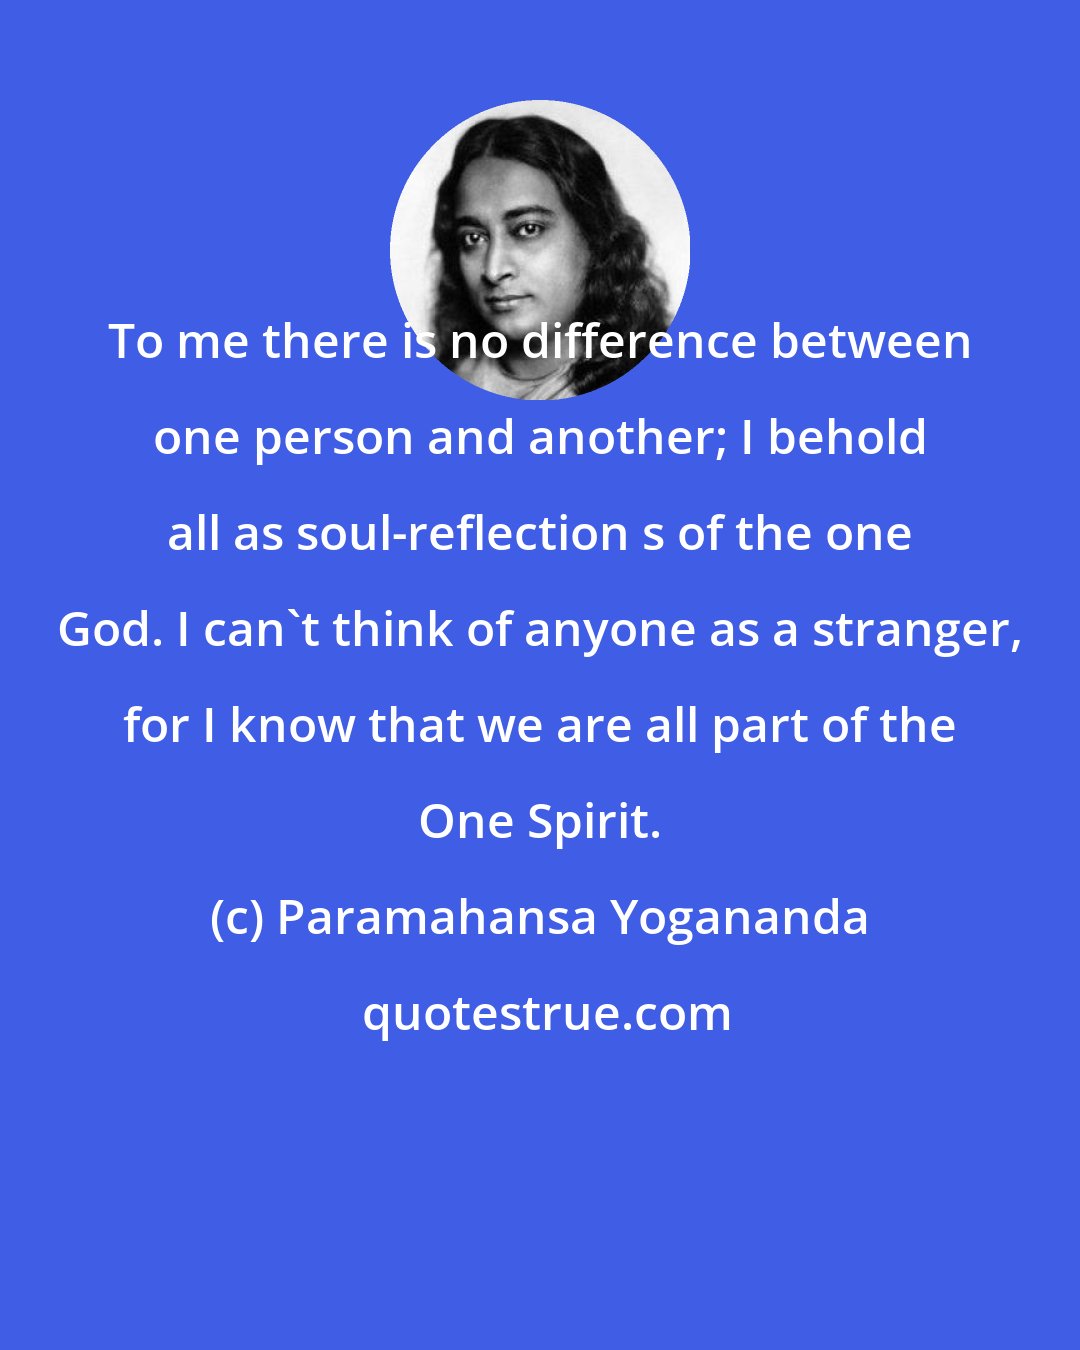 Paramahansa Yogananda: To me there is no difference between one person and another; I behold all as soul-reflection s of the one God. I can't think of anyone as a stranger, for I know that we are all part of the One Spirit.